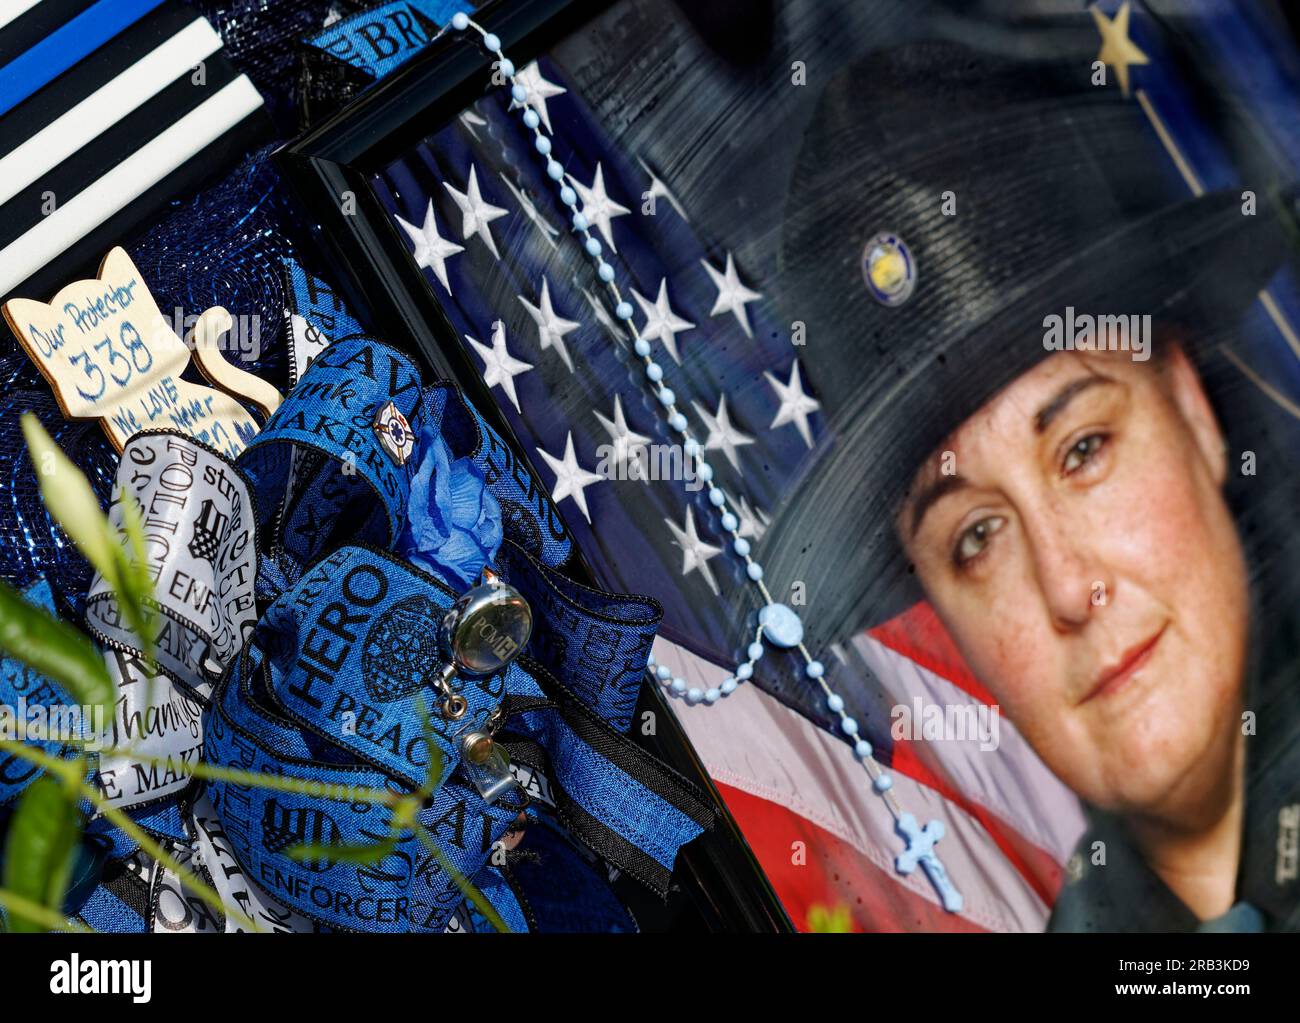 A photograph of Tell City Police Department Sgt. Heather J. Glenn leans against the front of her Dodge Durango patrol vehicle with memorial tributes piled around it on Thursday, July 6, 2023 near city hall in Tell City, Troy Township, Perry County, IN, USA. Glenn, 47, was shot and killed July 3 while trying to arrest a domestic violence suspect at a local hospital, becoming the first line-of-duty death in the Tell City Police Department's nearly 165-year history and second Indiana police officer to be killed in the line of duty in less than a week. (Apex MediaWire Photo by Billy Suratt) Stock Photo